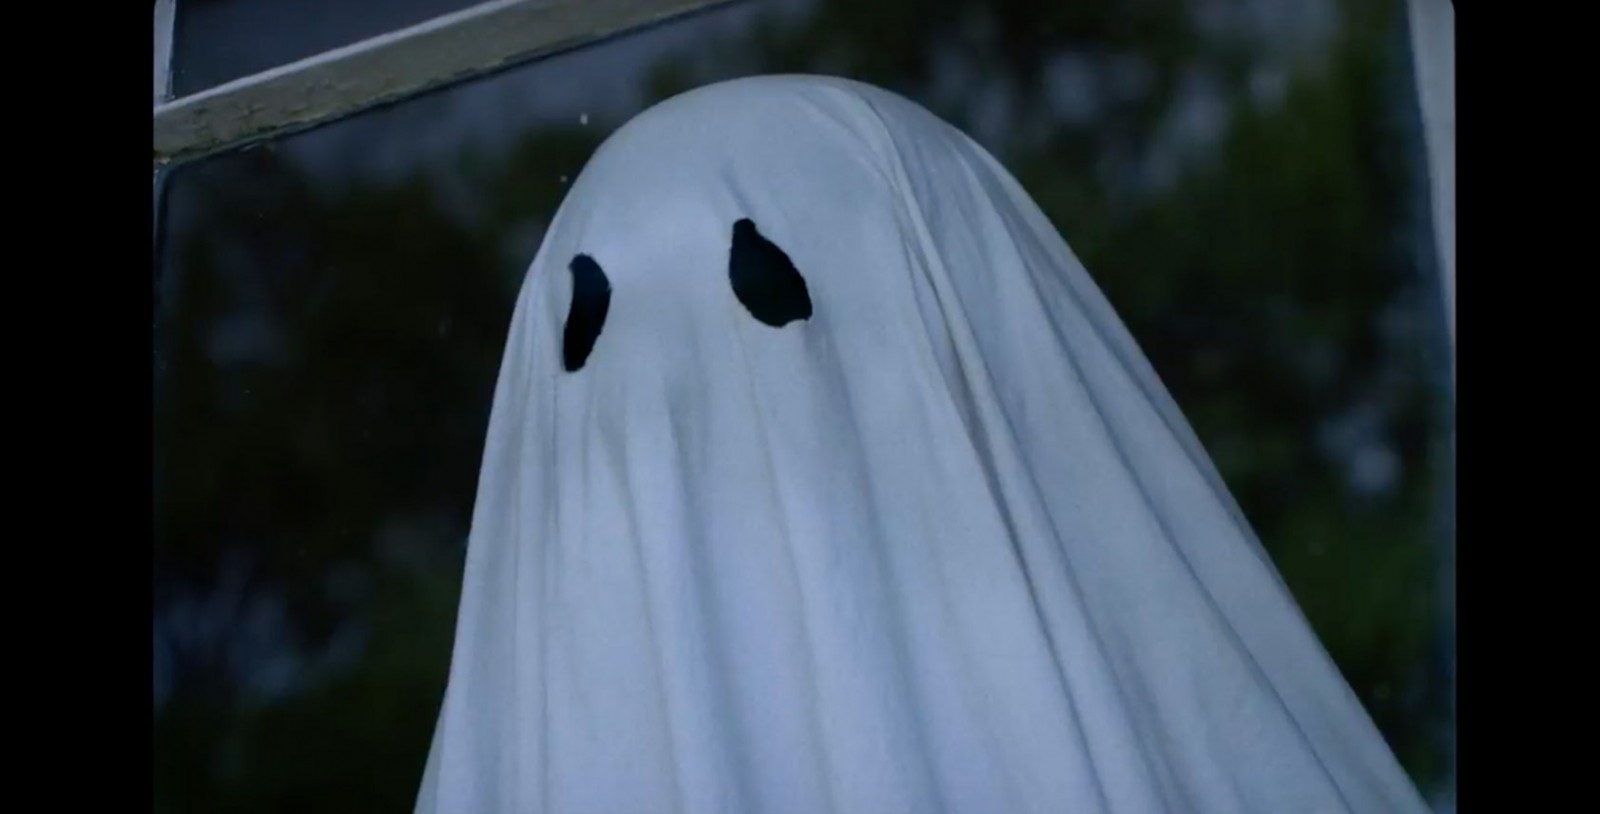 15 Questions I Have About the Trailer for ‘A Ghost Story’ - Sharp Magazine